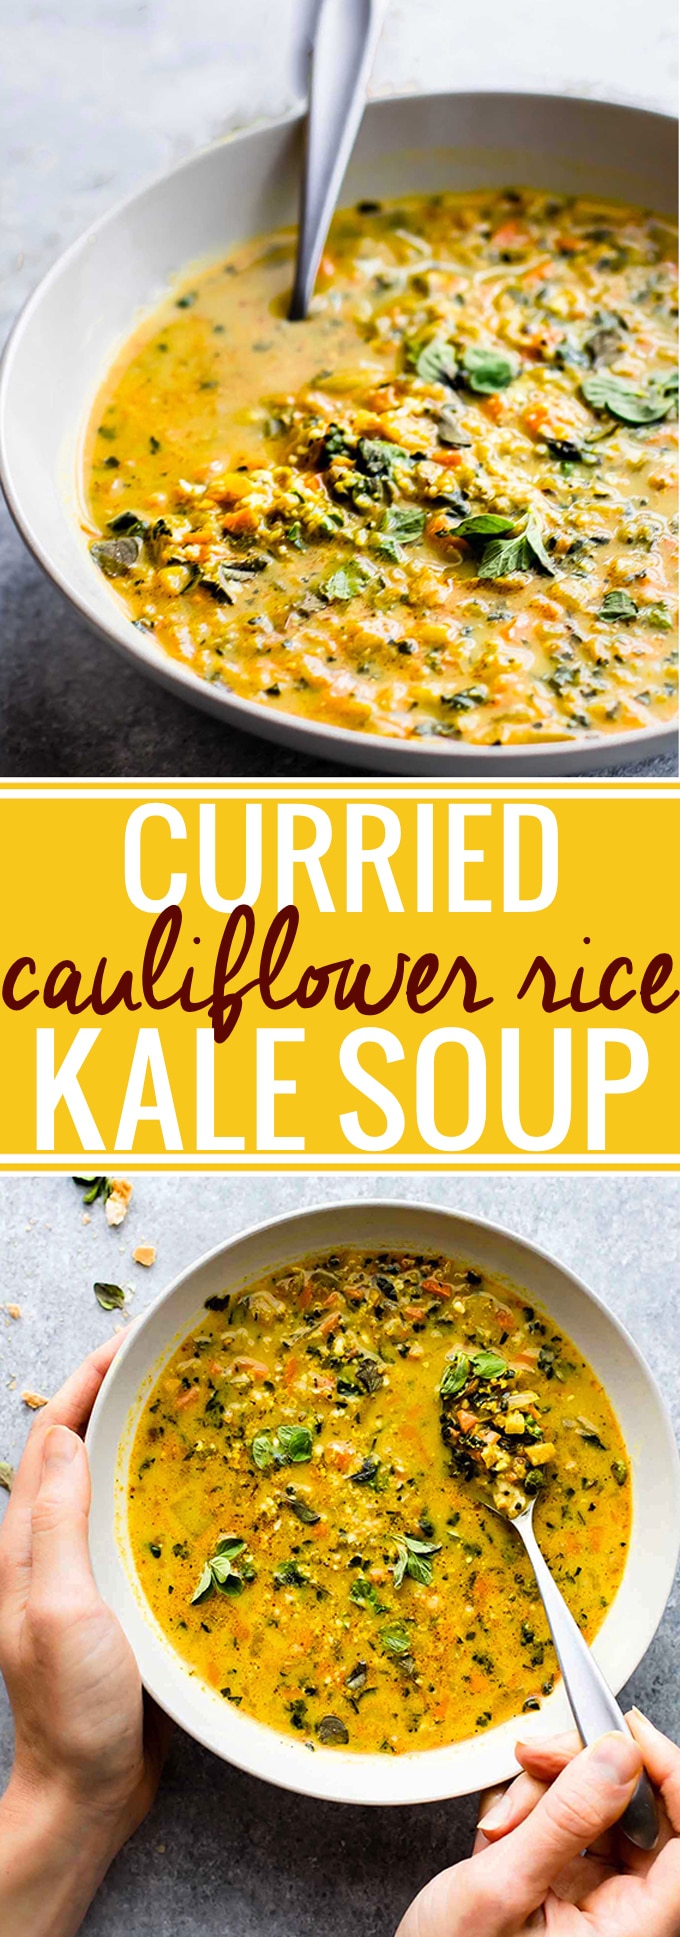 This Curried Cauliflower Rice Kale Soup is one flavorful healthy soup to keep you warm this season. An easy paleo soup recipe for a nutritious meal-in-a-bowl.  Roasted curried cauliflower "rice" with kale and even more veggies to fill your bowl! A delicious vegetarian soup to make again again!   Vegan and Whole30 friendly! @cottercrunch